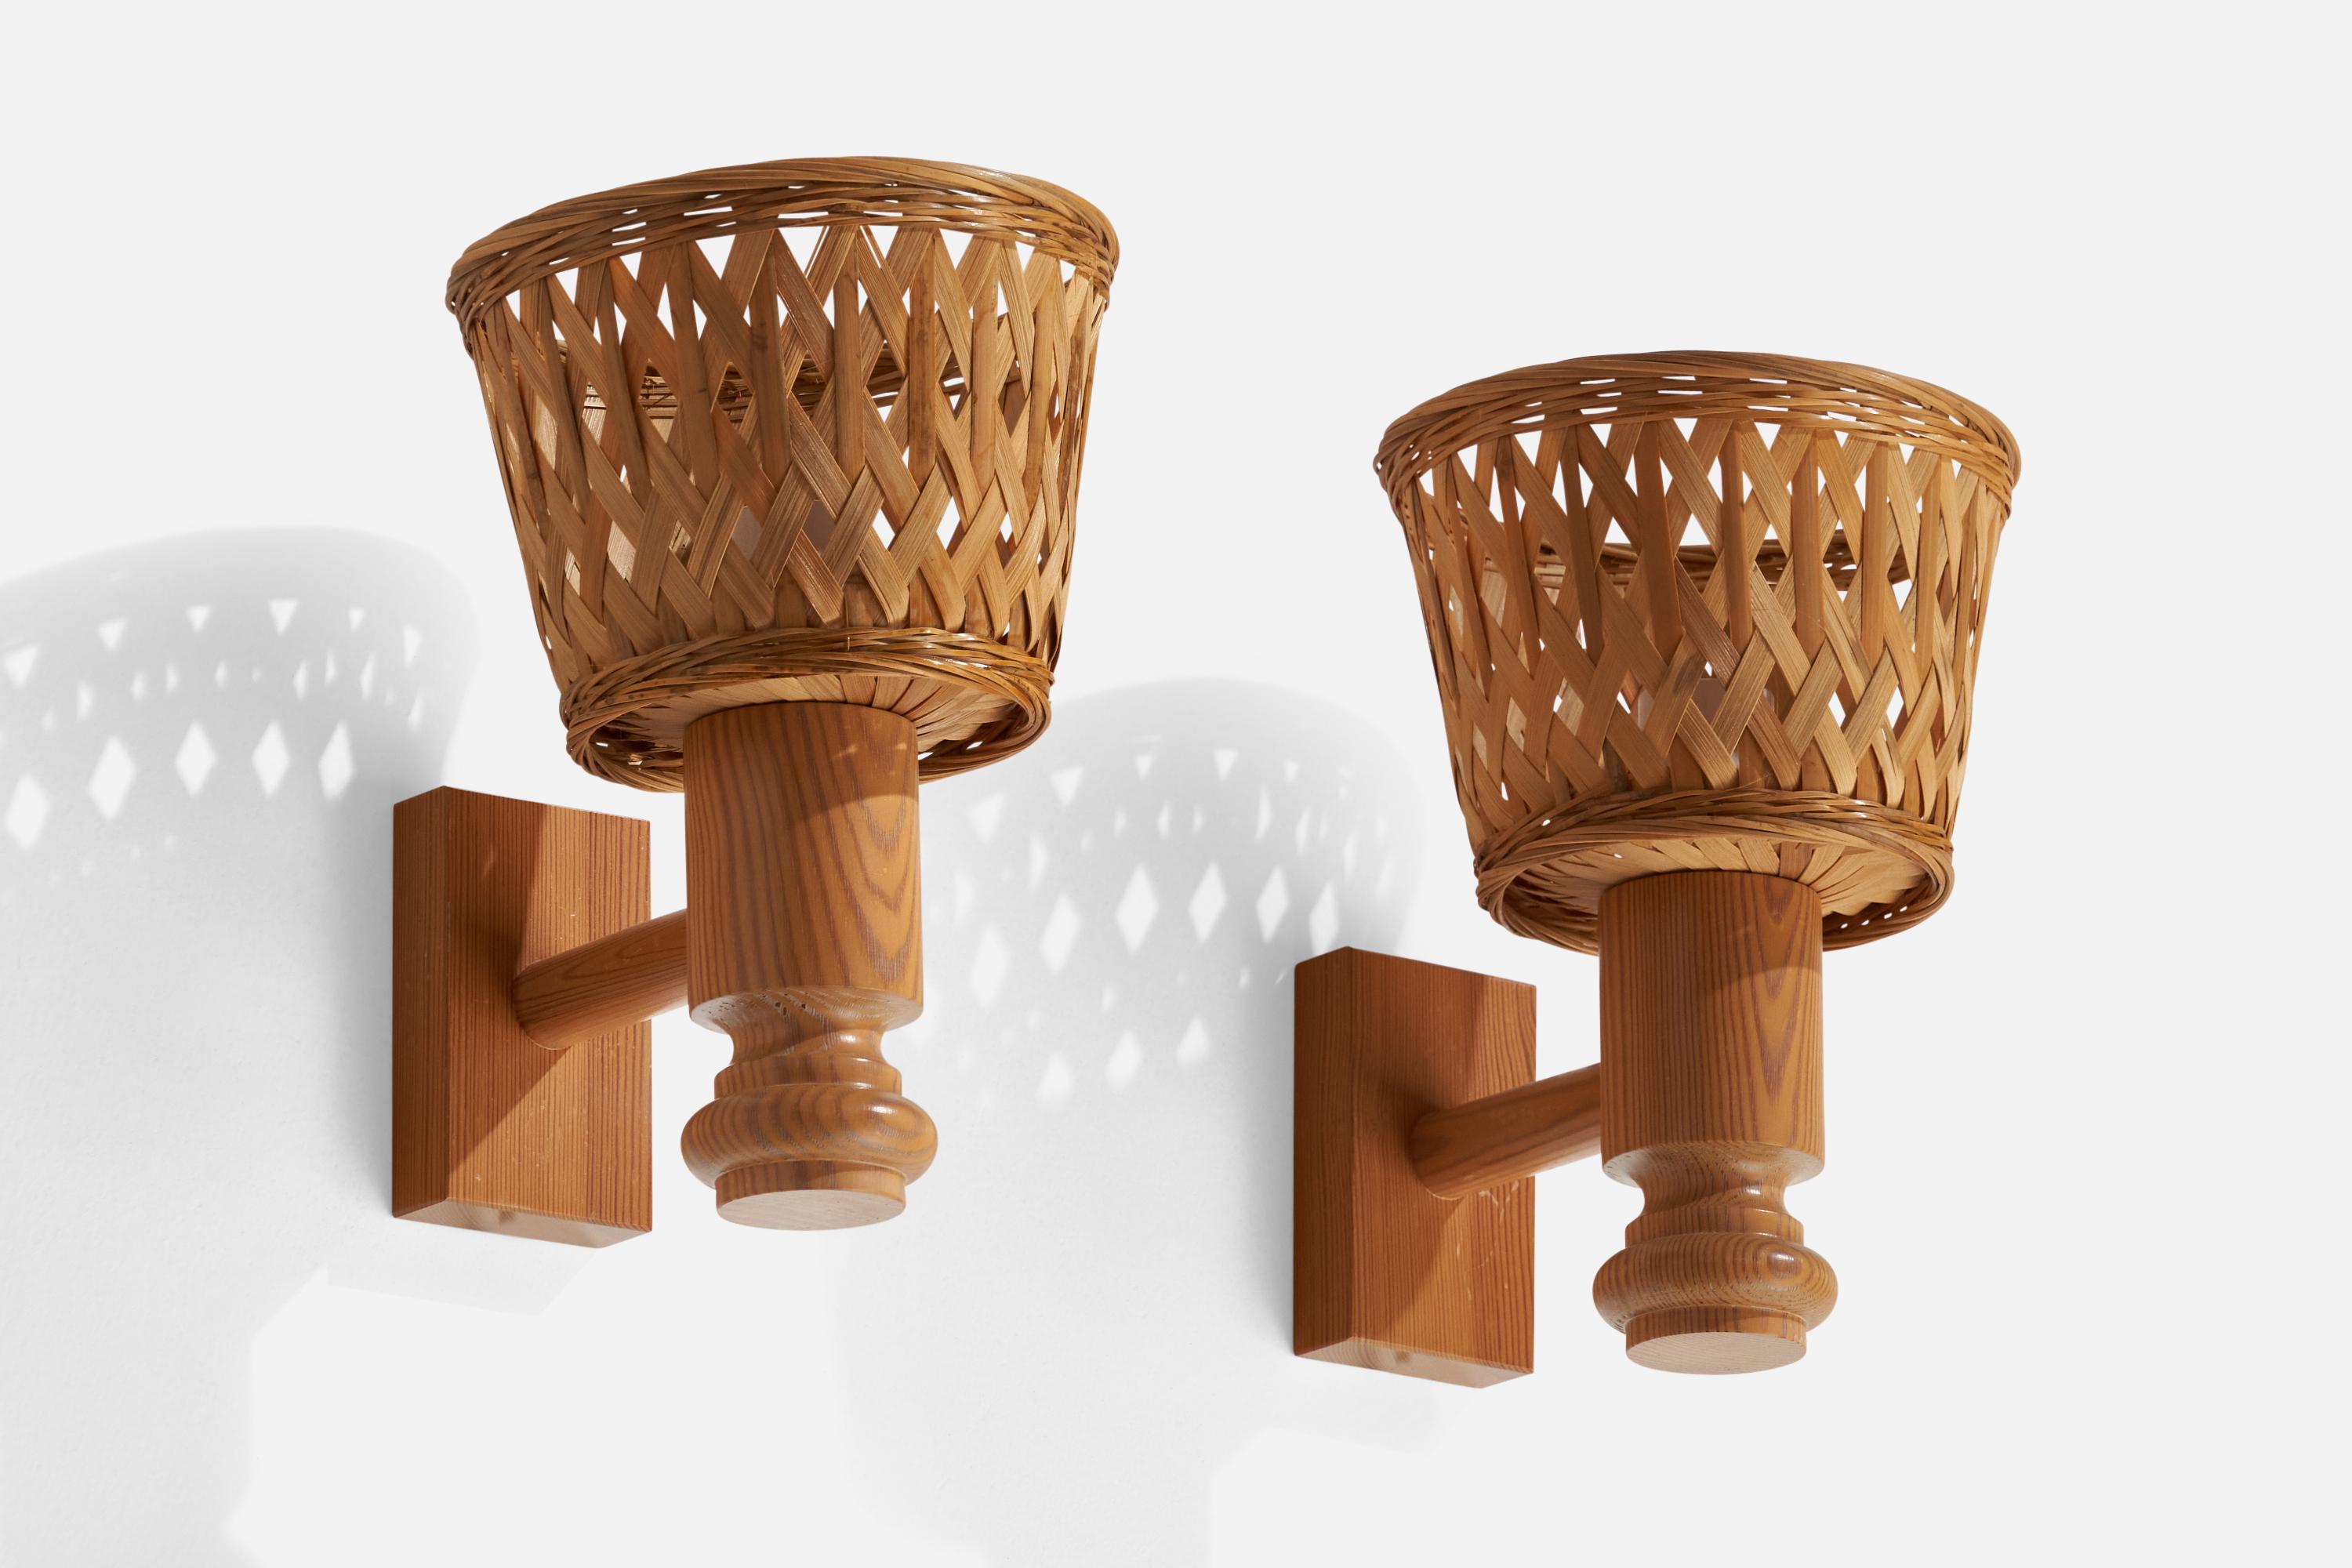 A pair of pine and rattan wall lights designed and produced in Sweden, c. 1970s.

Overall Dimensions (inches): 10.25” H x 7.1” W x 9.05” D
Back Plate Dimensions (inches): 4.55” H x 2.75” W x 1.05” D
Bulb Specifications: E-26 Bulbs
Number of Sockets: